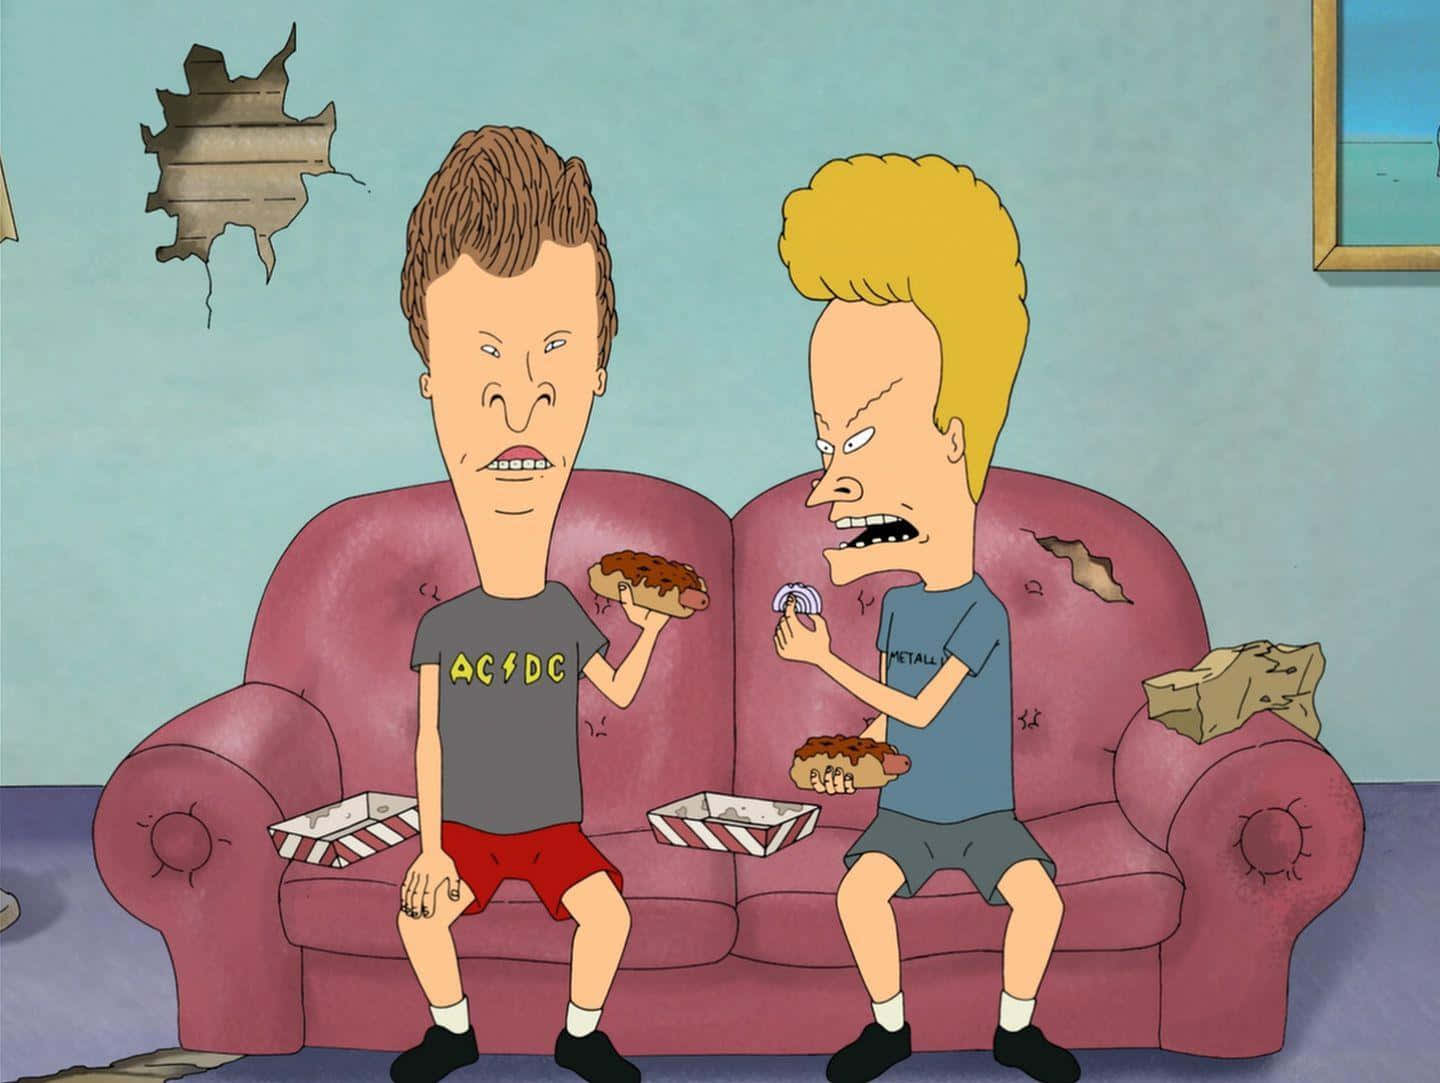 Beavis and Butthead looking cool